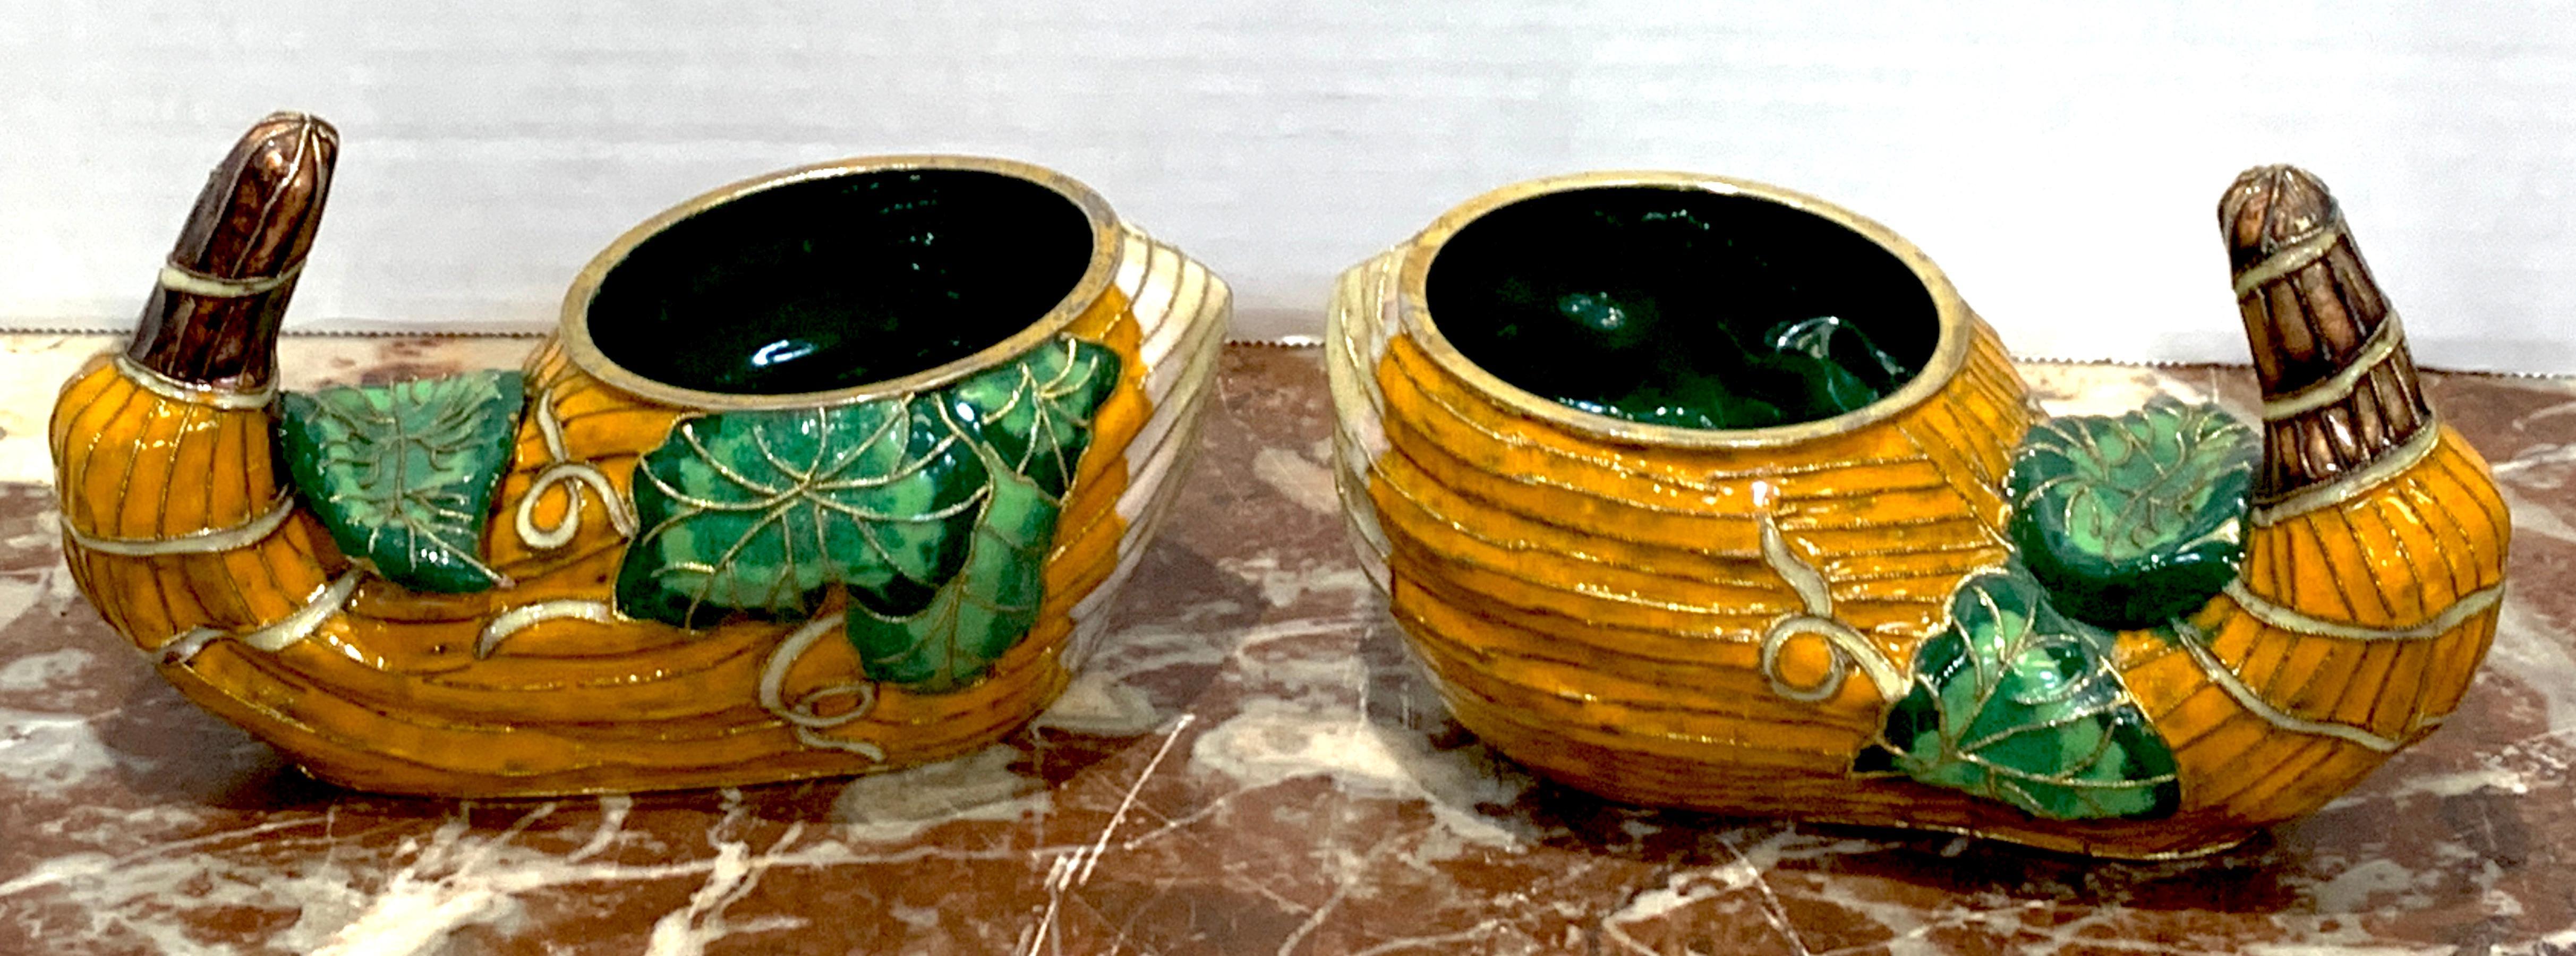 Plated Pair of Chinese Export Enamel Gourd Cachepots For Sale